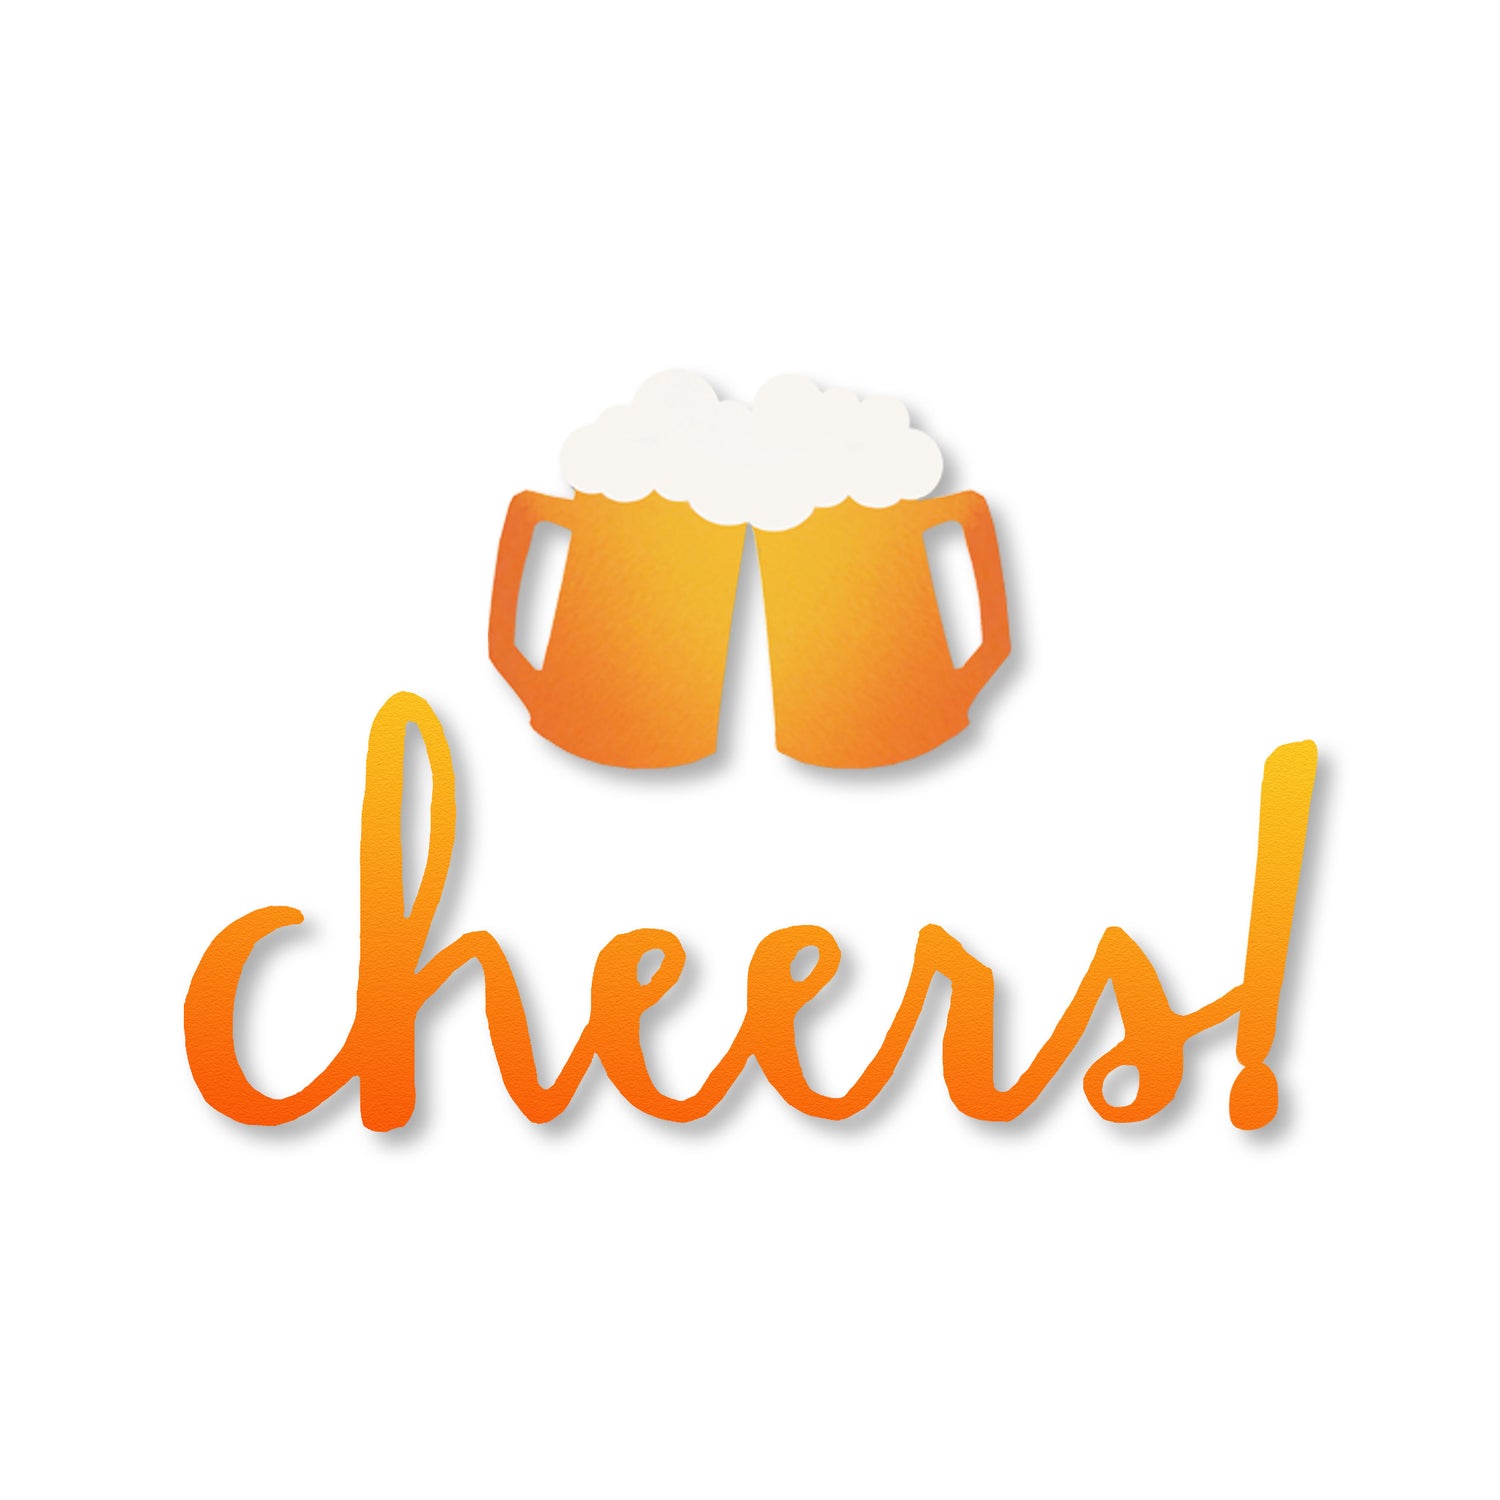 Cheers! w/ Beer Magnets S/2, Yellow